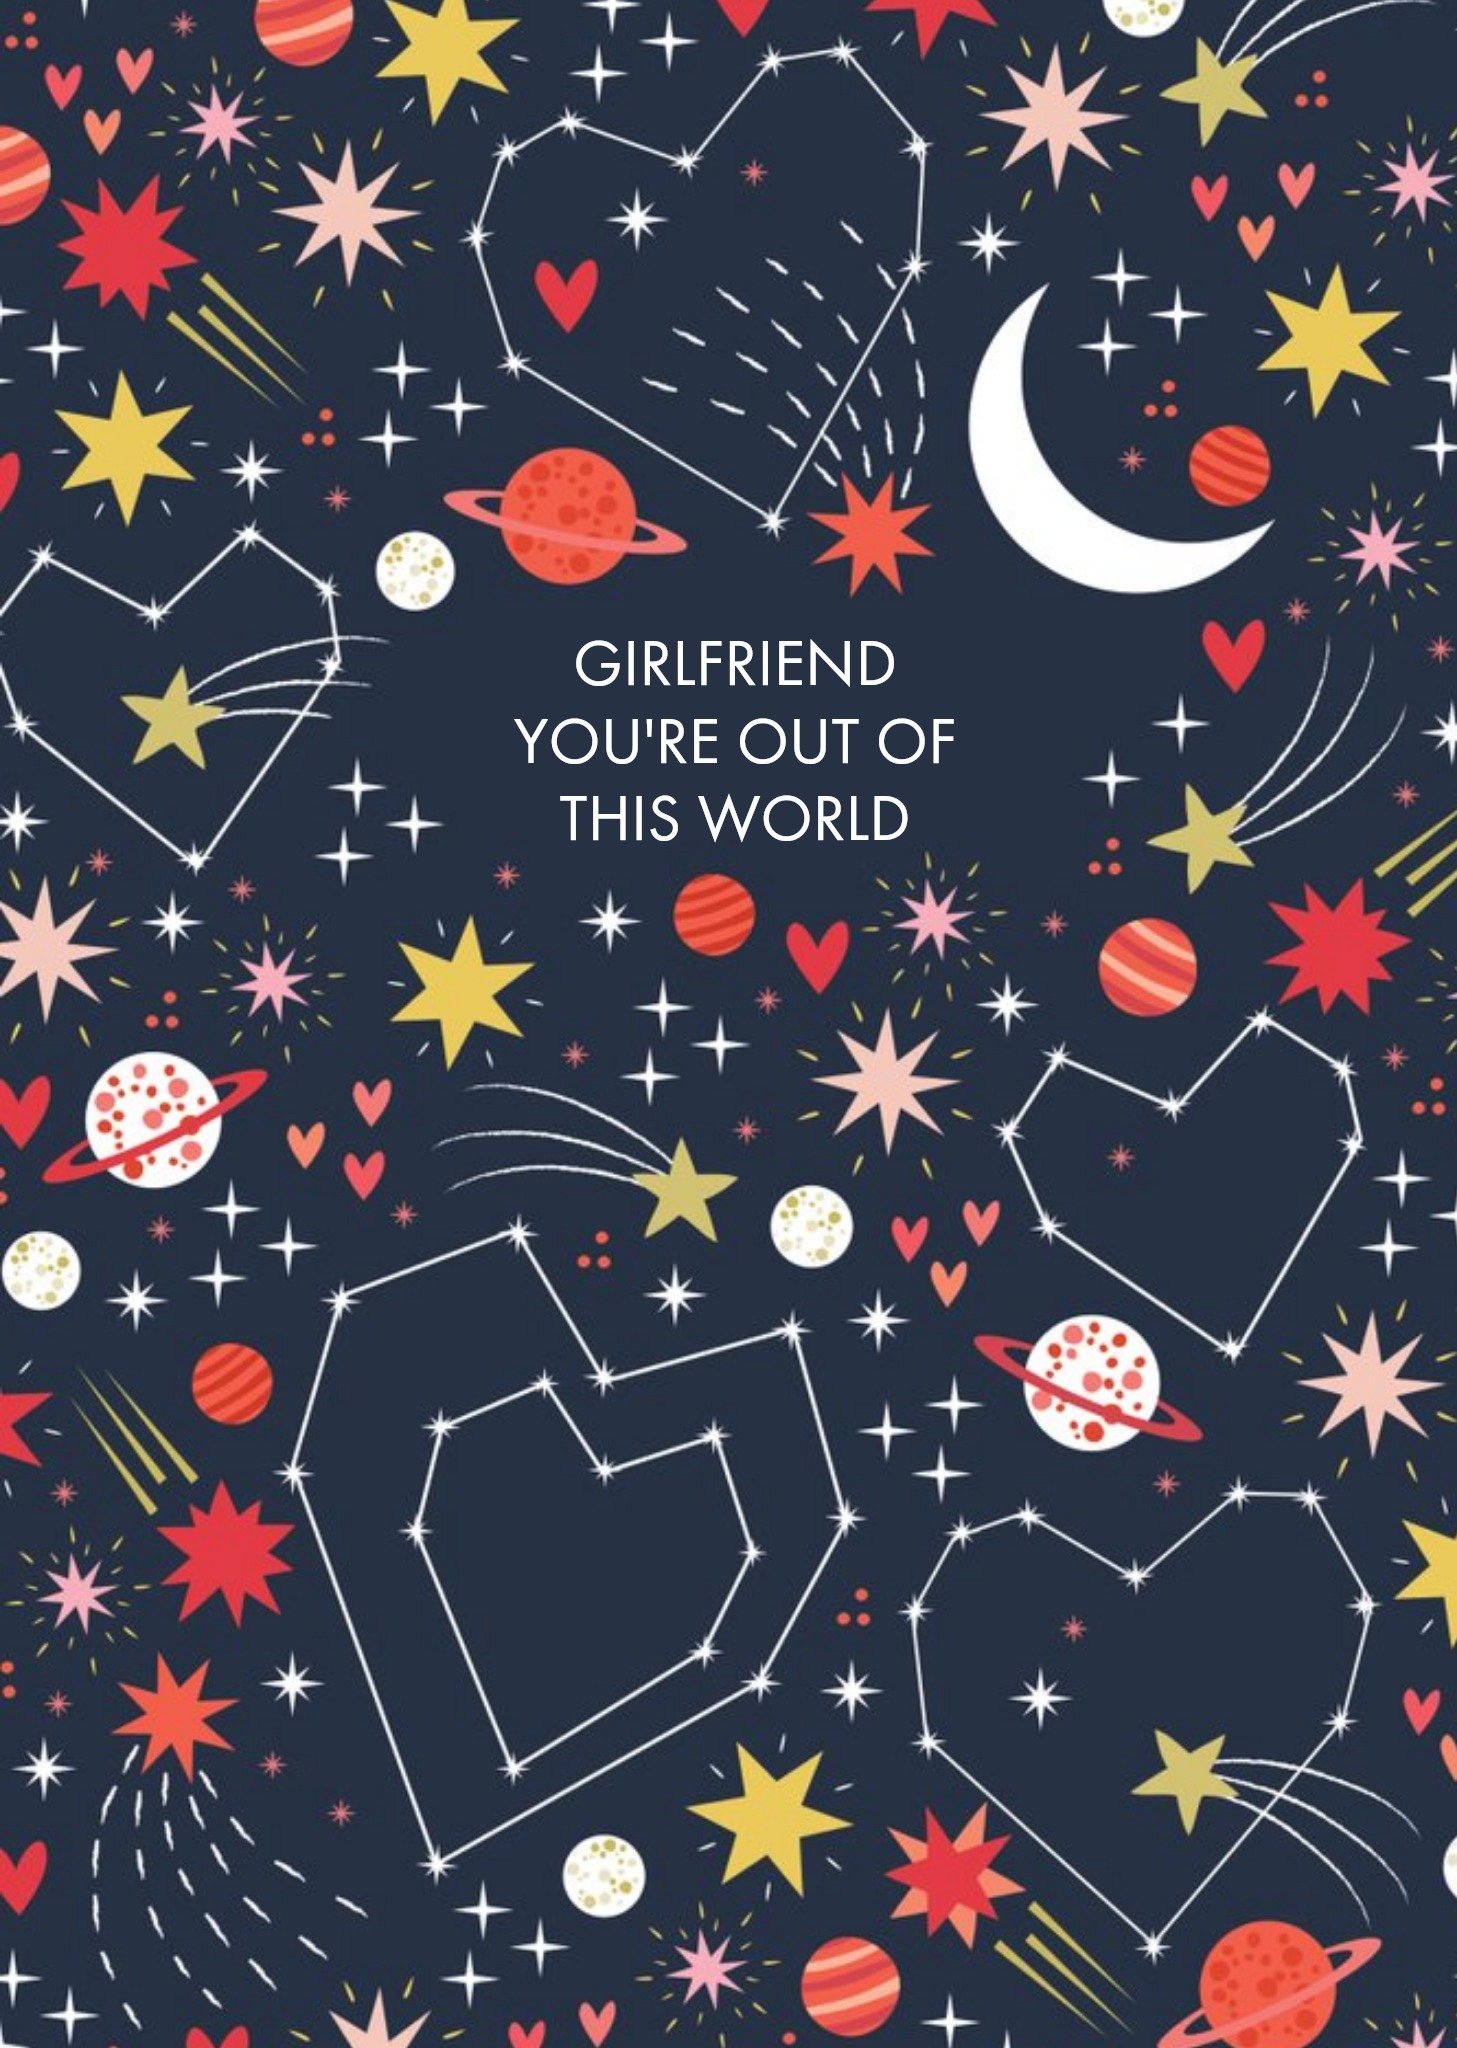 Moonpig Colourful Cosmos You're Out Of This World Girlfriend Valentine's Card, Large